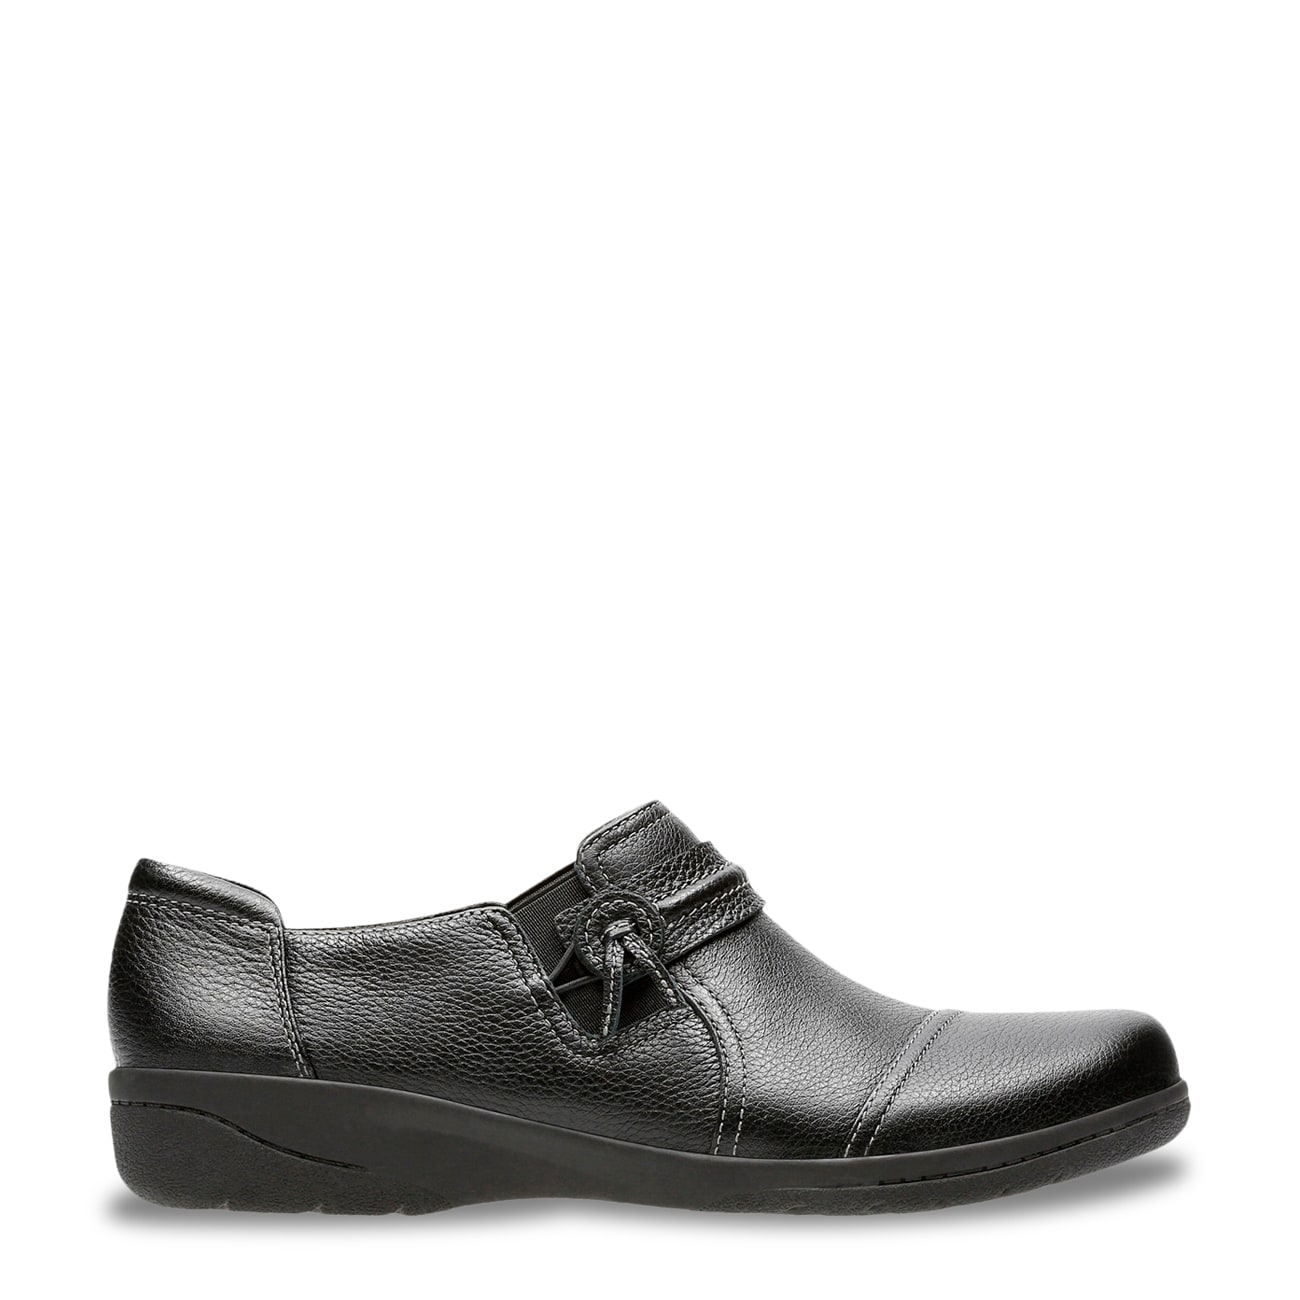 clarks shoes clearance canada